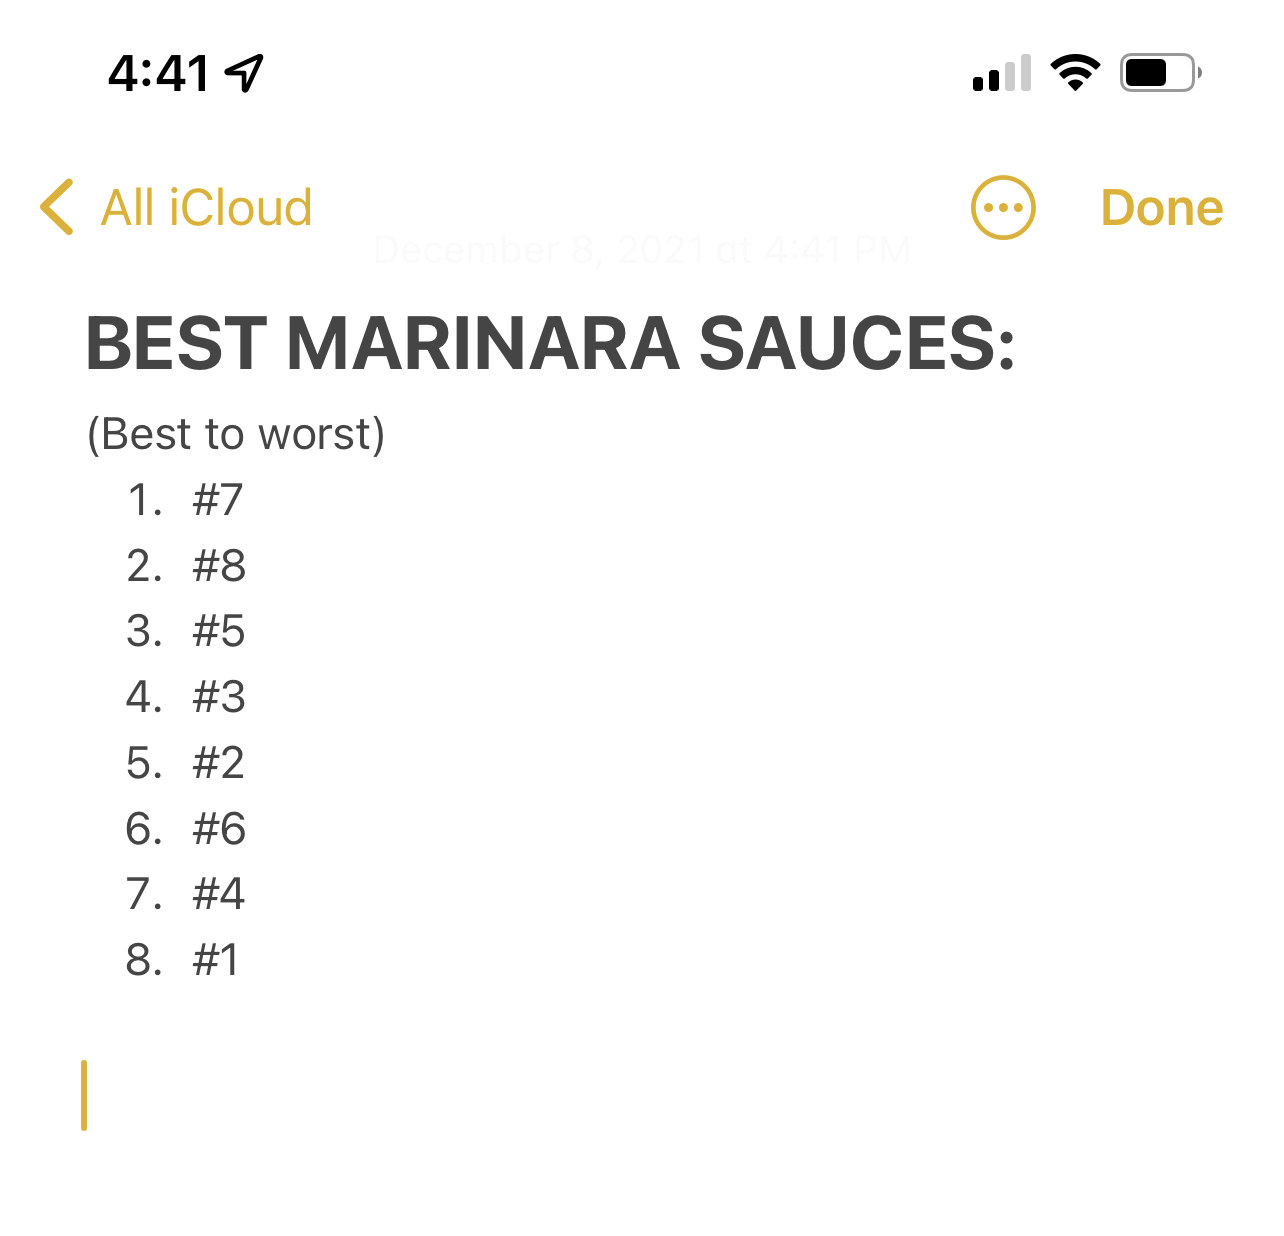 Screenshot of iPhone note with text: &quot;BEST MARINARA SAUCES&quot; listing the order, best to worst, 7, 8, 5, 3, 2, 6, 4, 1